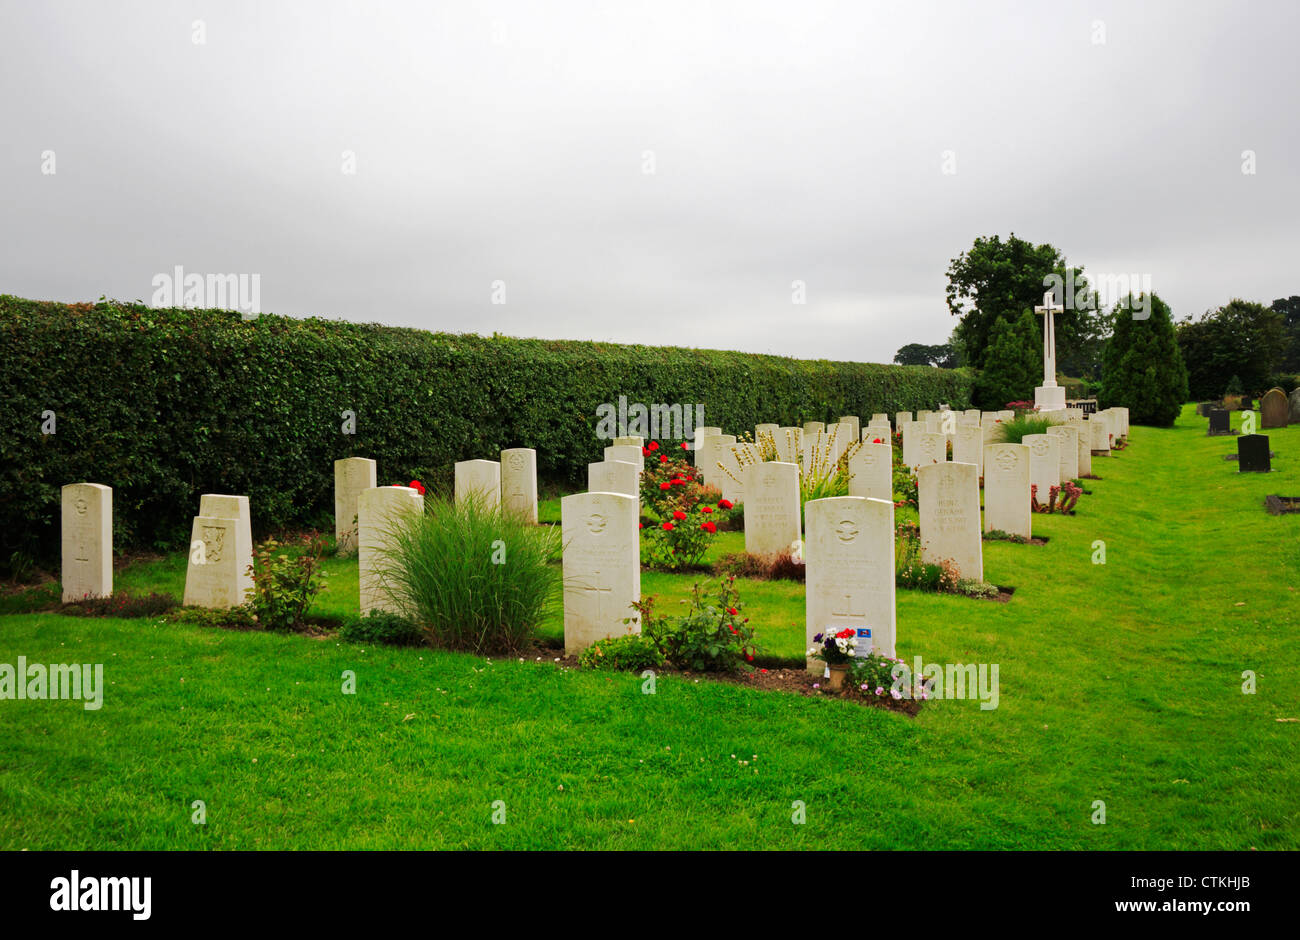 A view of the war graves plot and headstones for service personnel at Scottow Cemetery, Norfolk, England, United Kingdom. Stock Photo